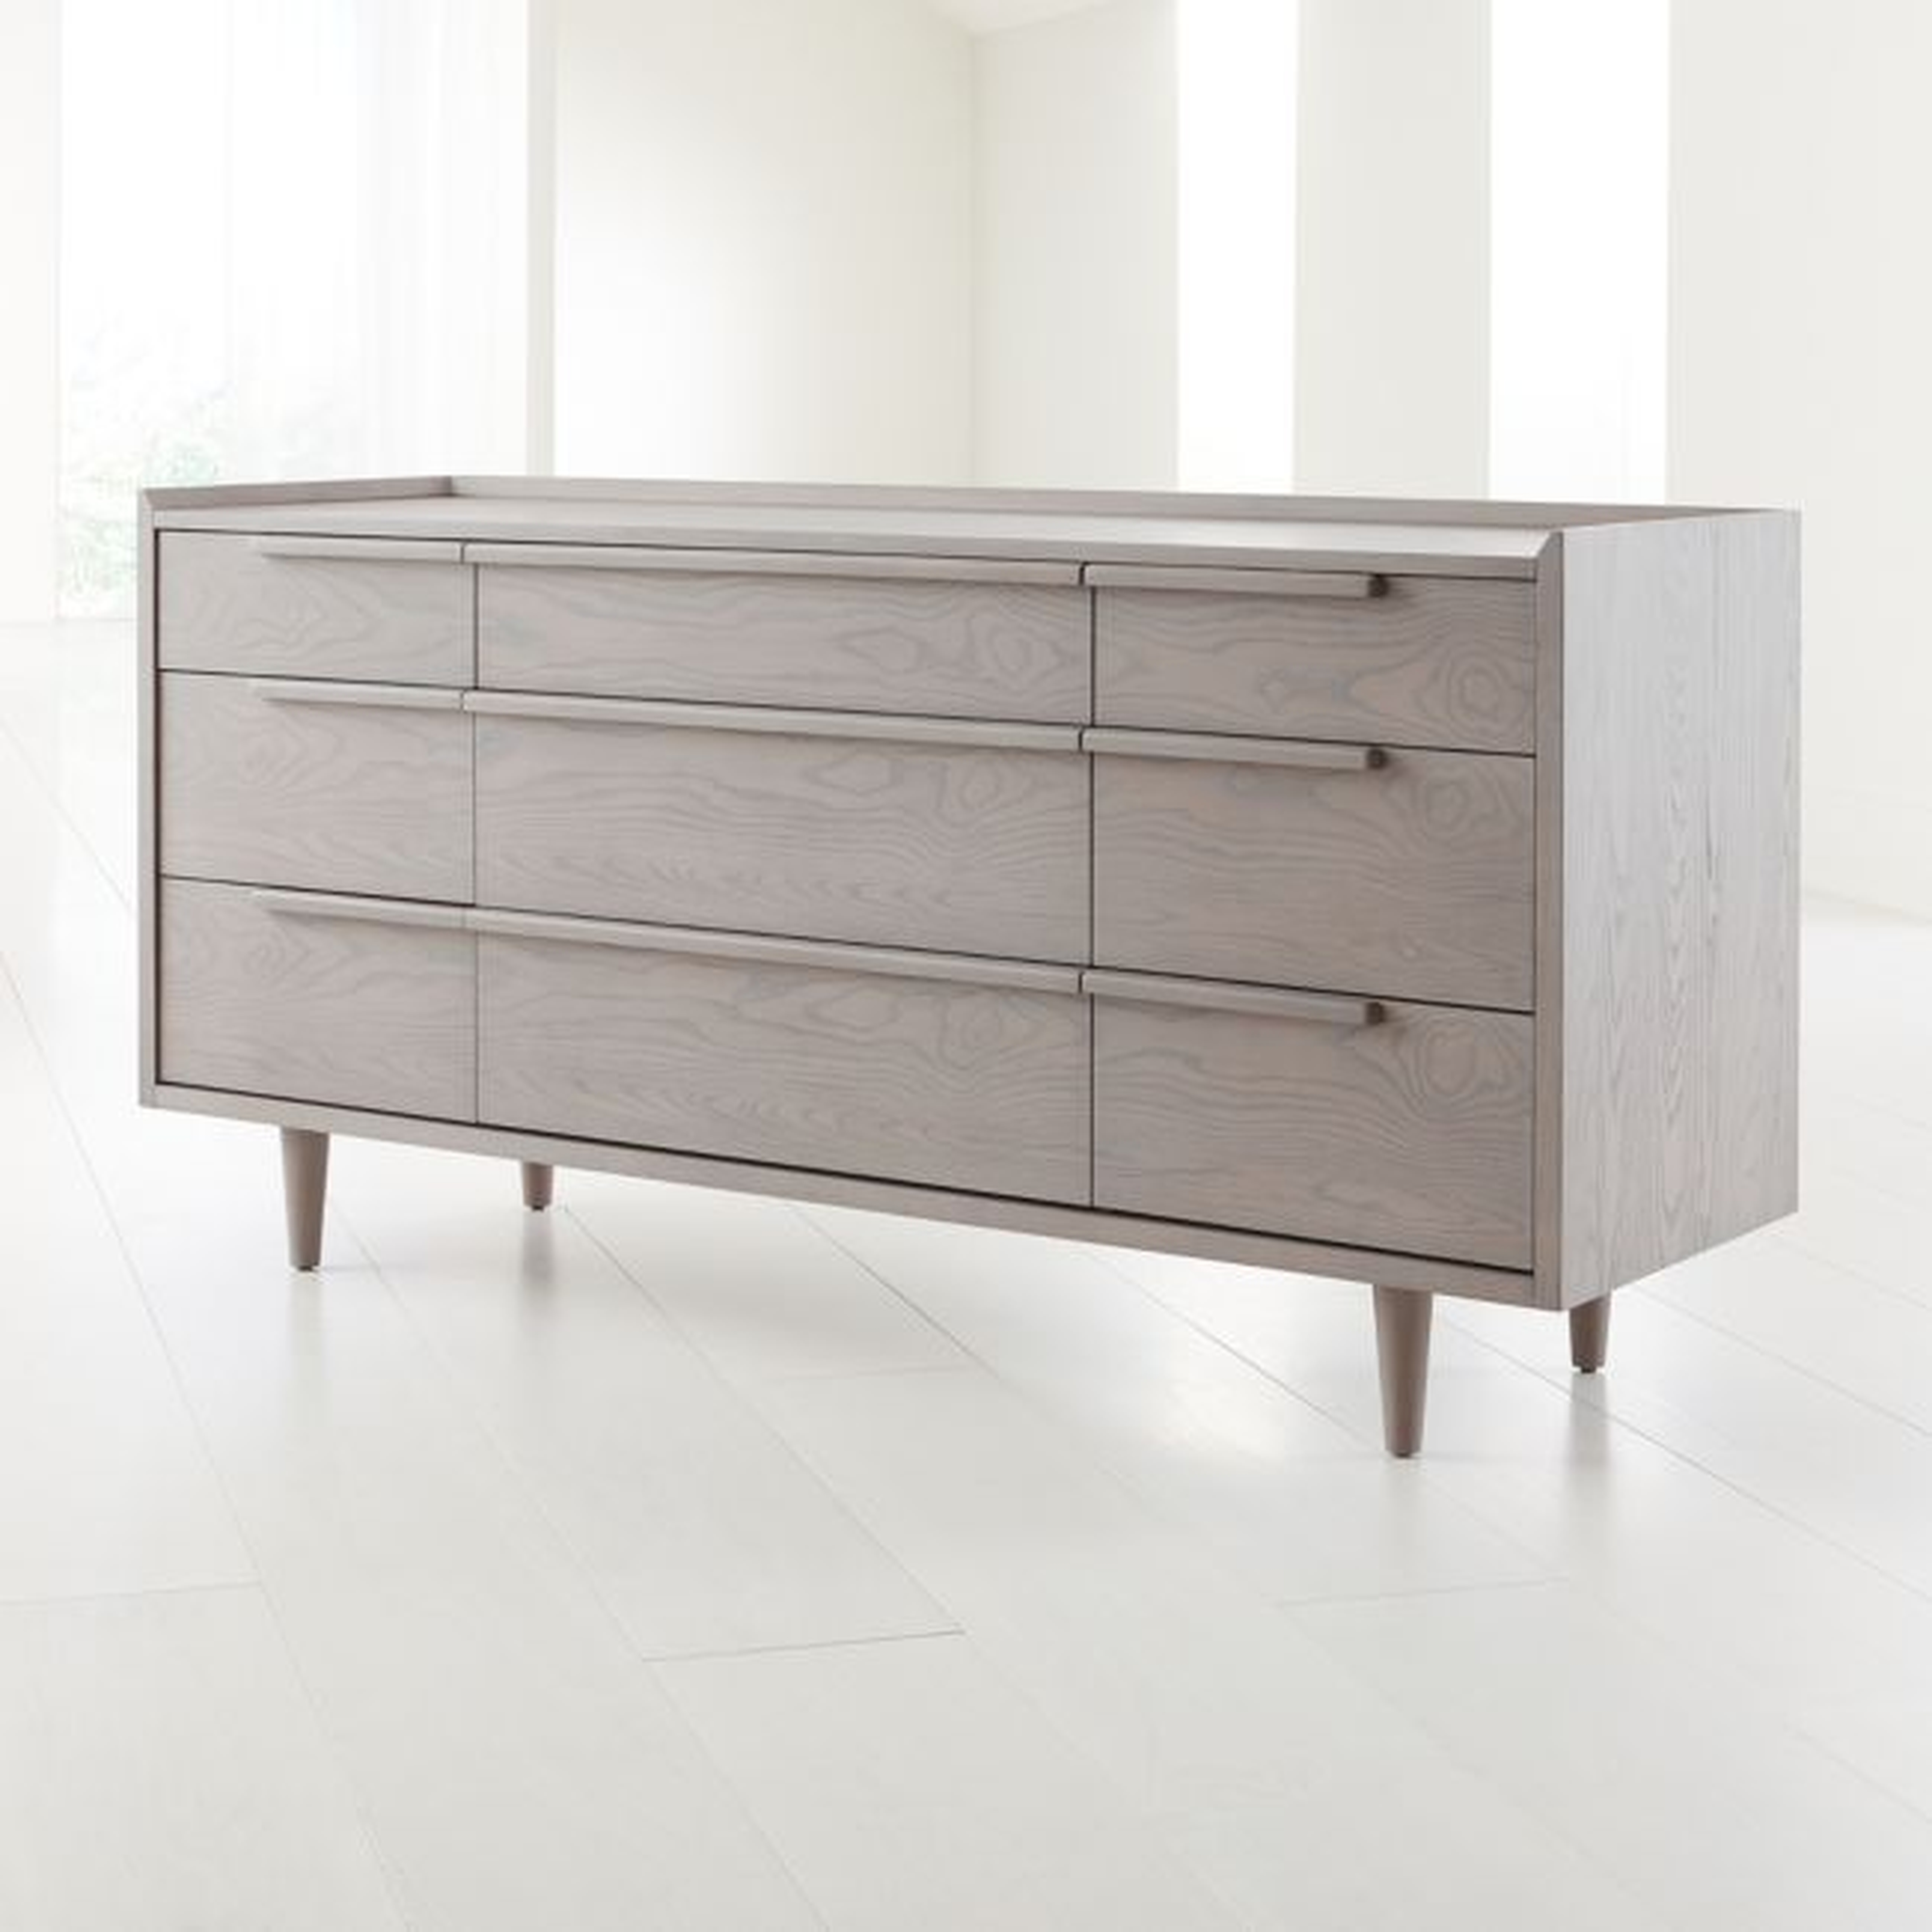 Tate Stone 9-Drawer Dresser - Crate and Barrel